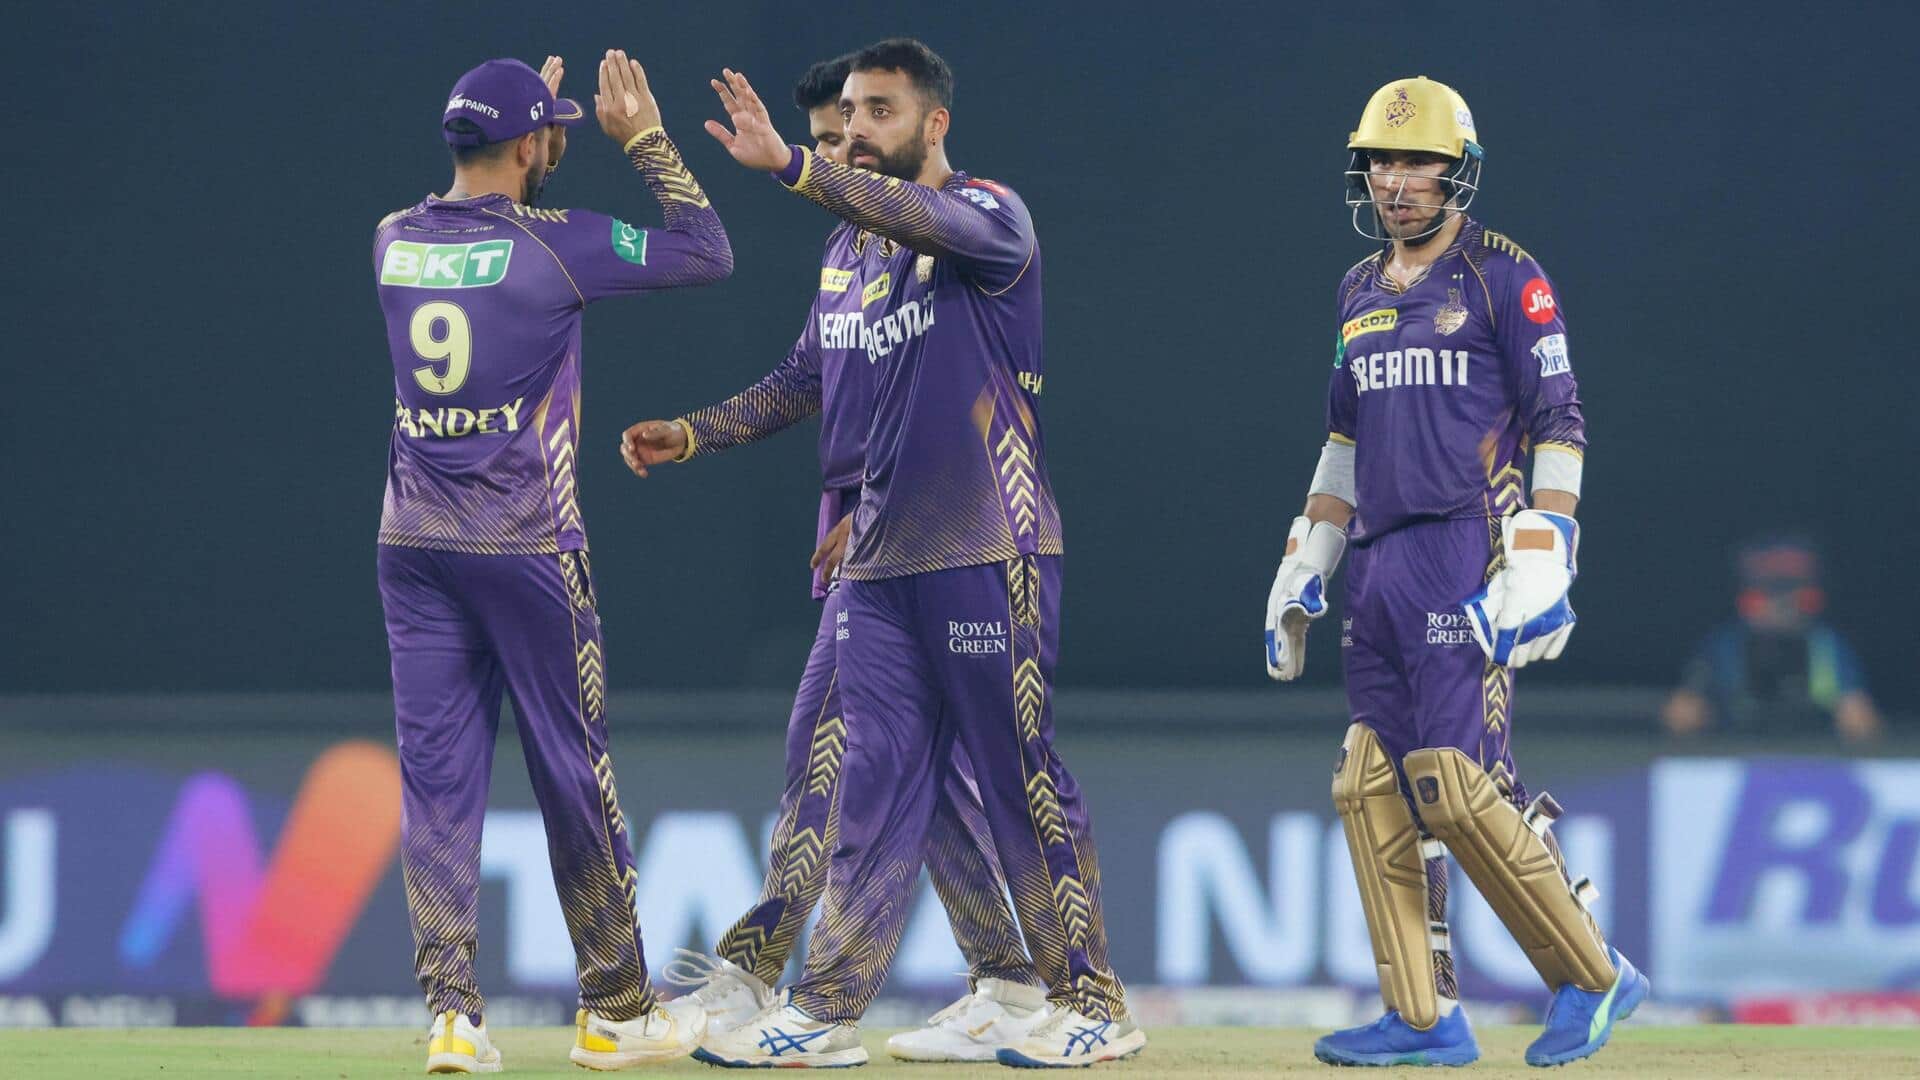 KKR bowlers with 20-plus wickets in an IPL season